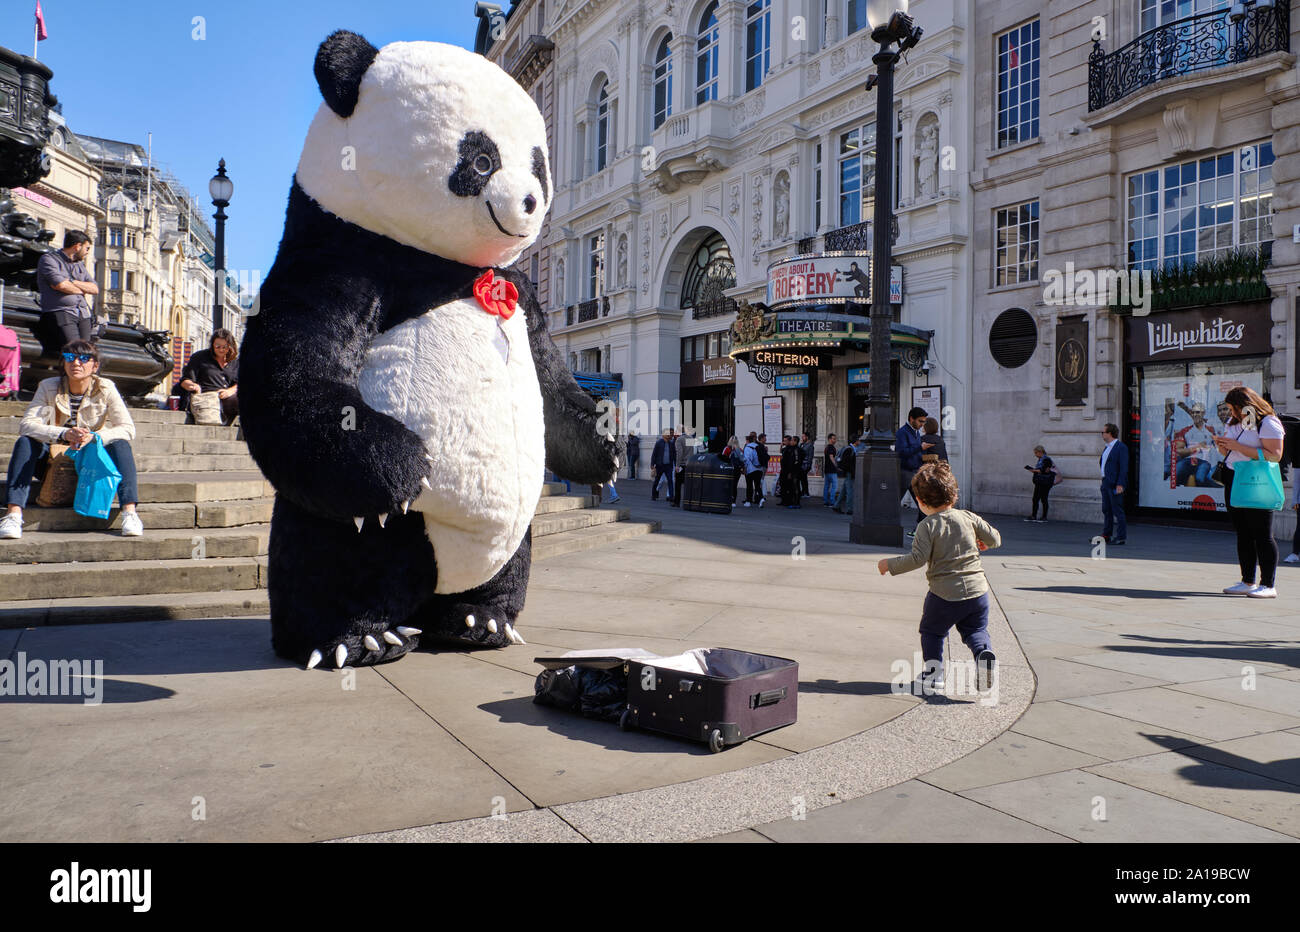 Street performer dressed in giant panda suit at Piccadilly circus with kid running around Stock Photo